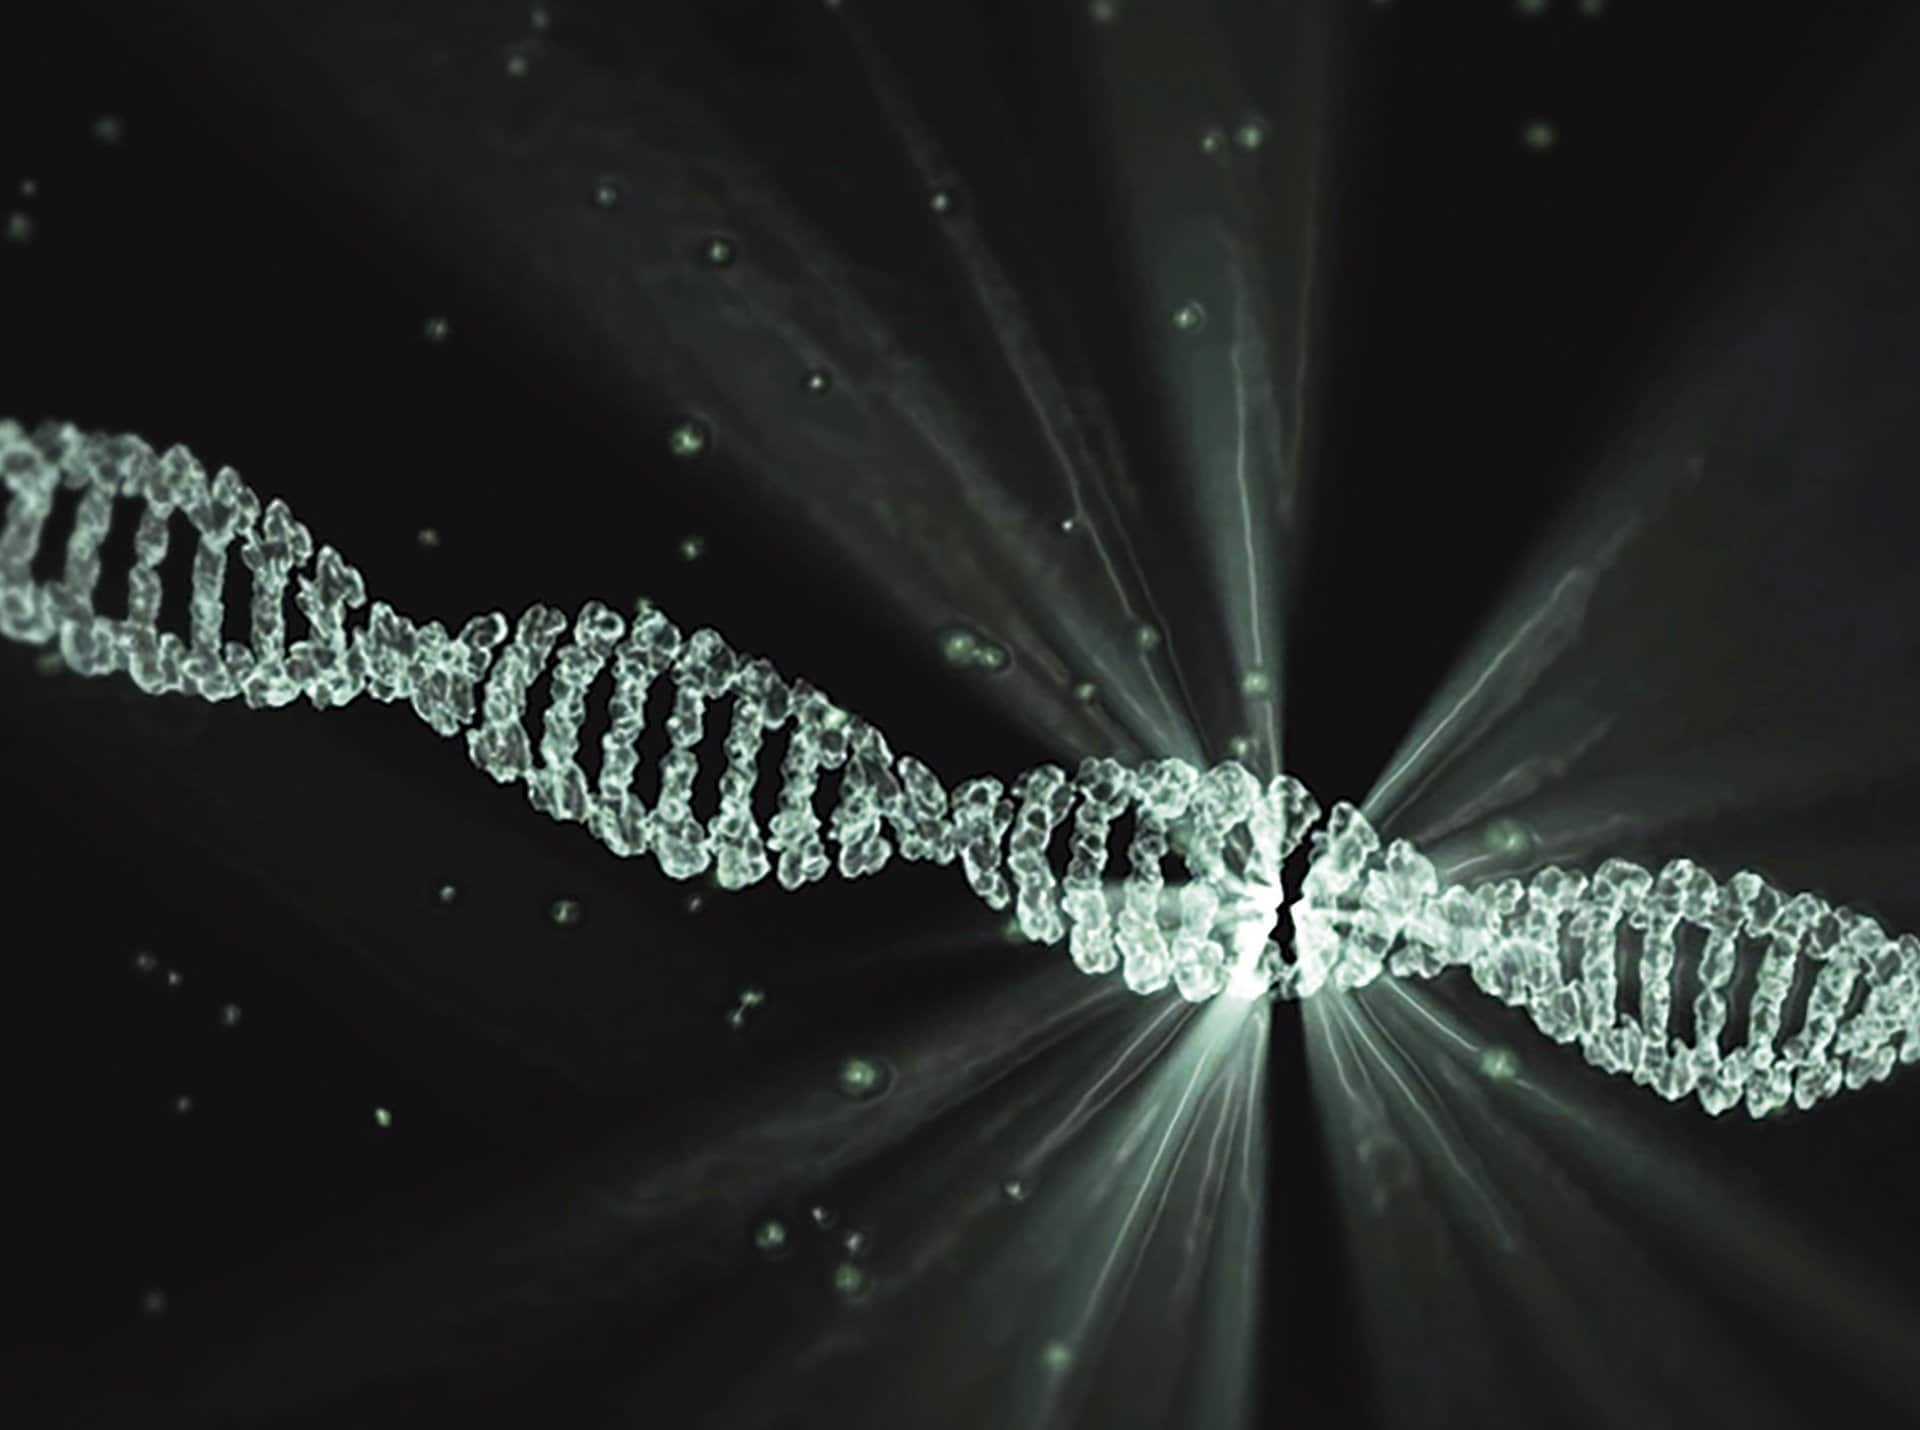 DNA mutations aren't as random as we thought